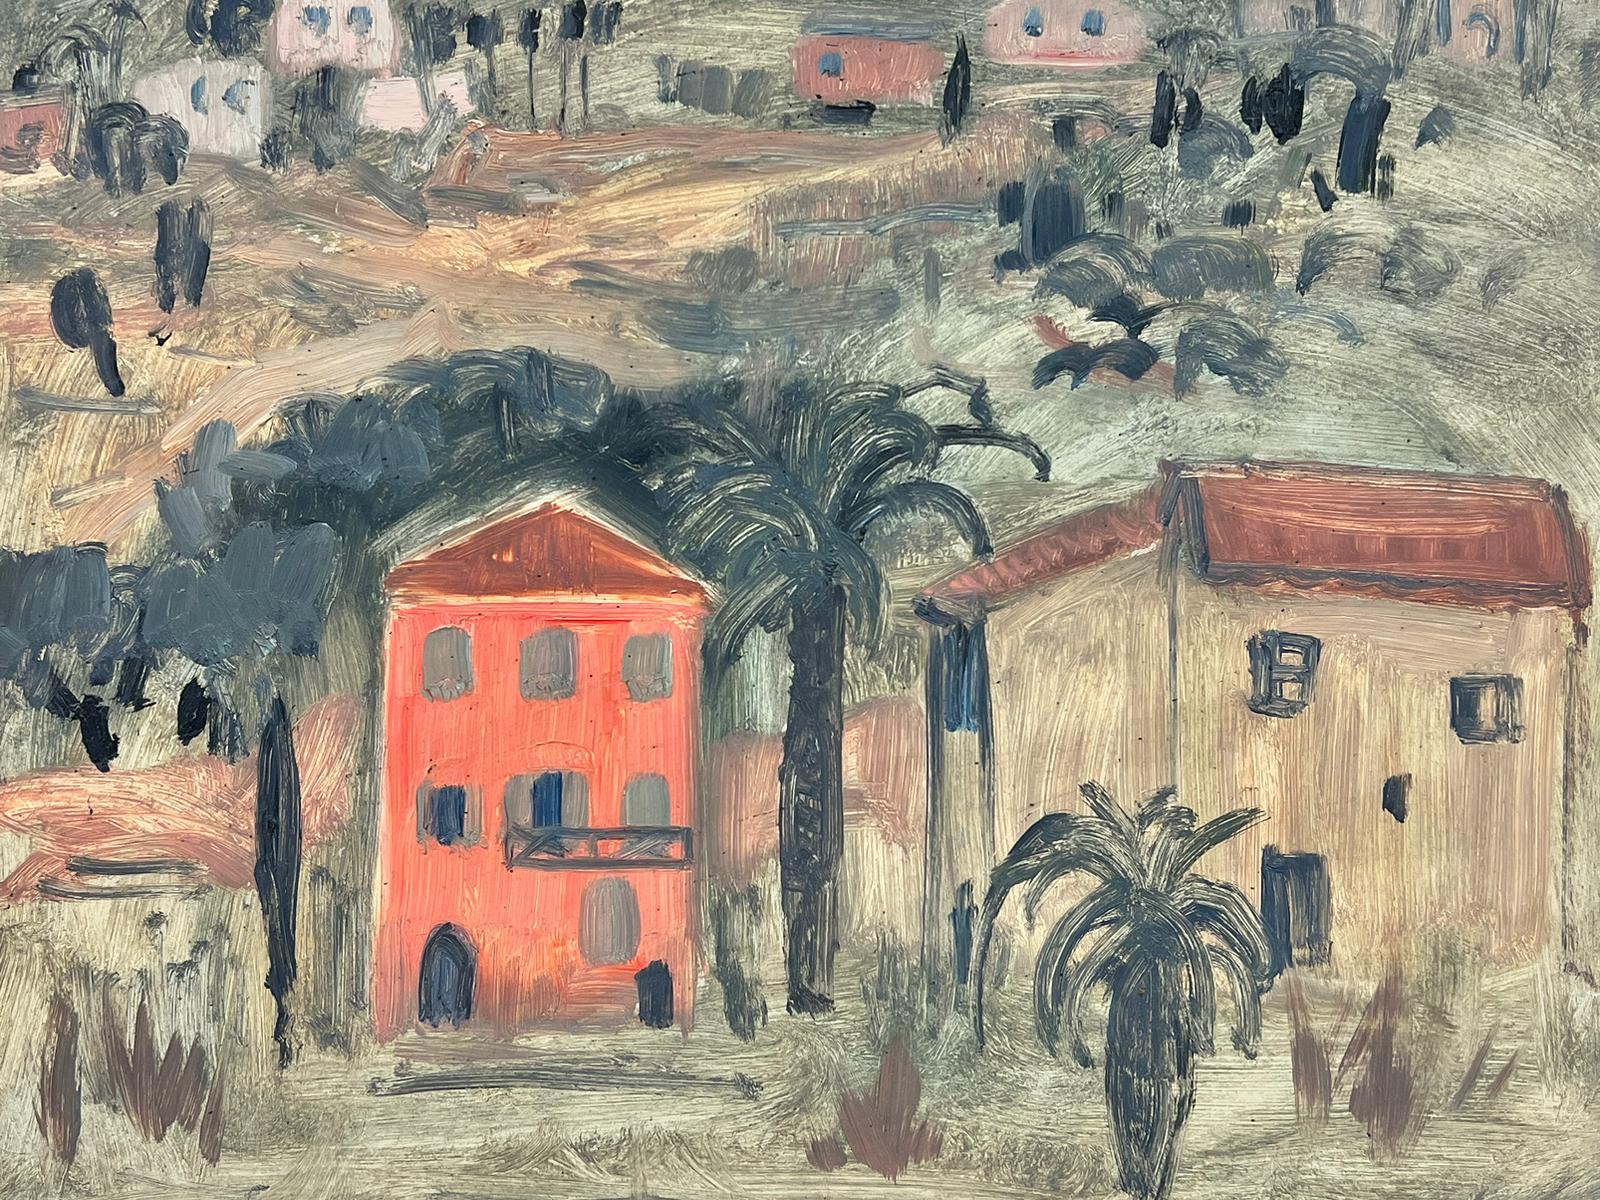 Artist/ School: French School, mid 20th century, follower of Henri Matisse

Title: The Pink House. 

Medium: oil on board, framed

Framed: 22.5 x 25.5 inches
Painting: 15 x 18 inches

Provenance: private collection, France

Condition: The painting